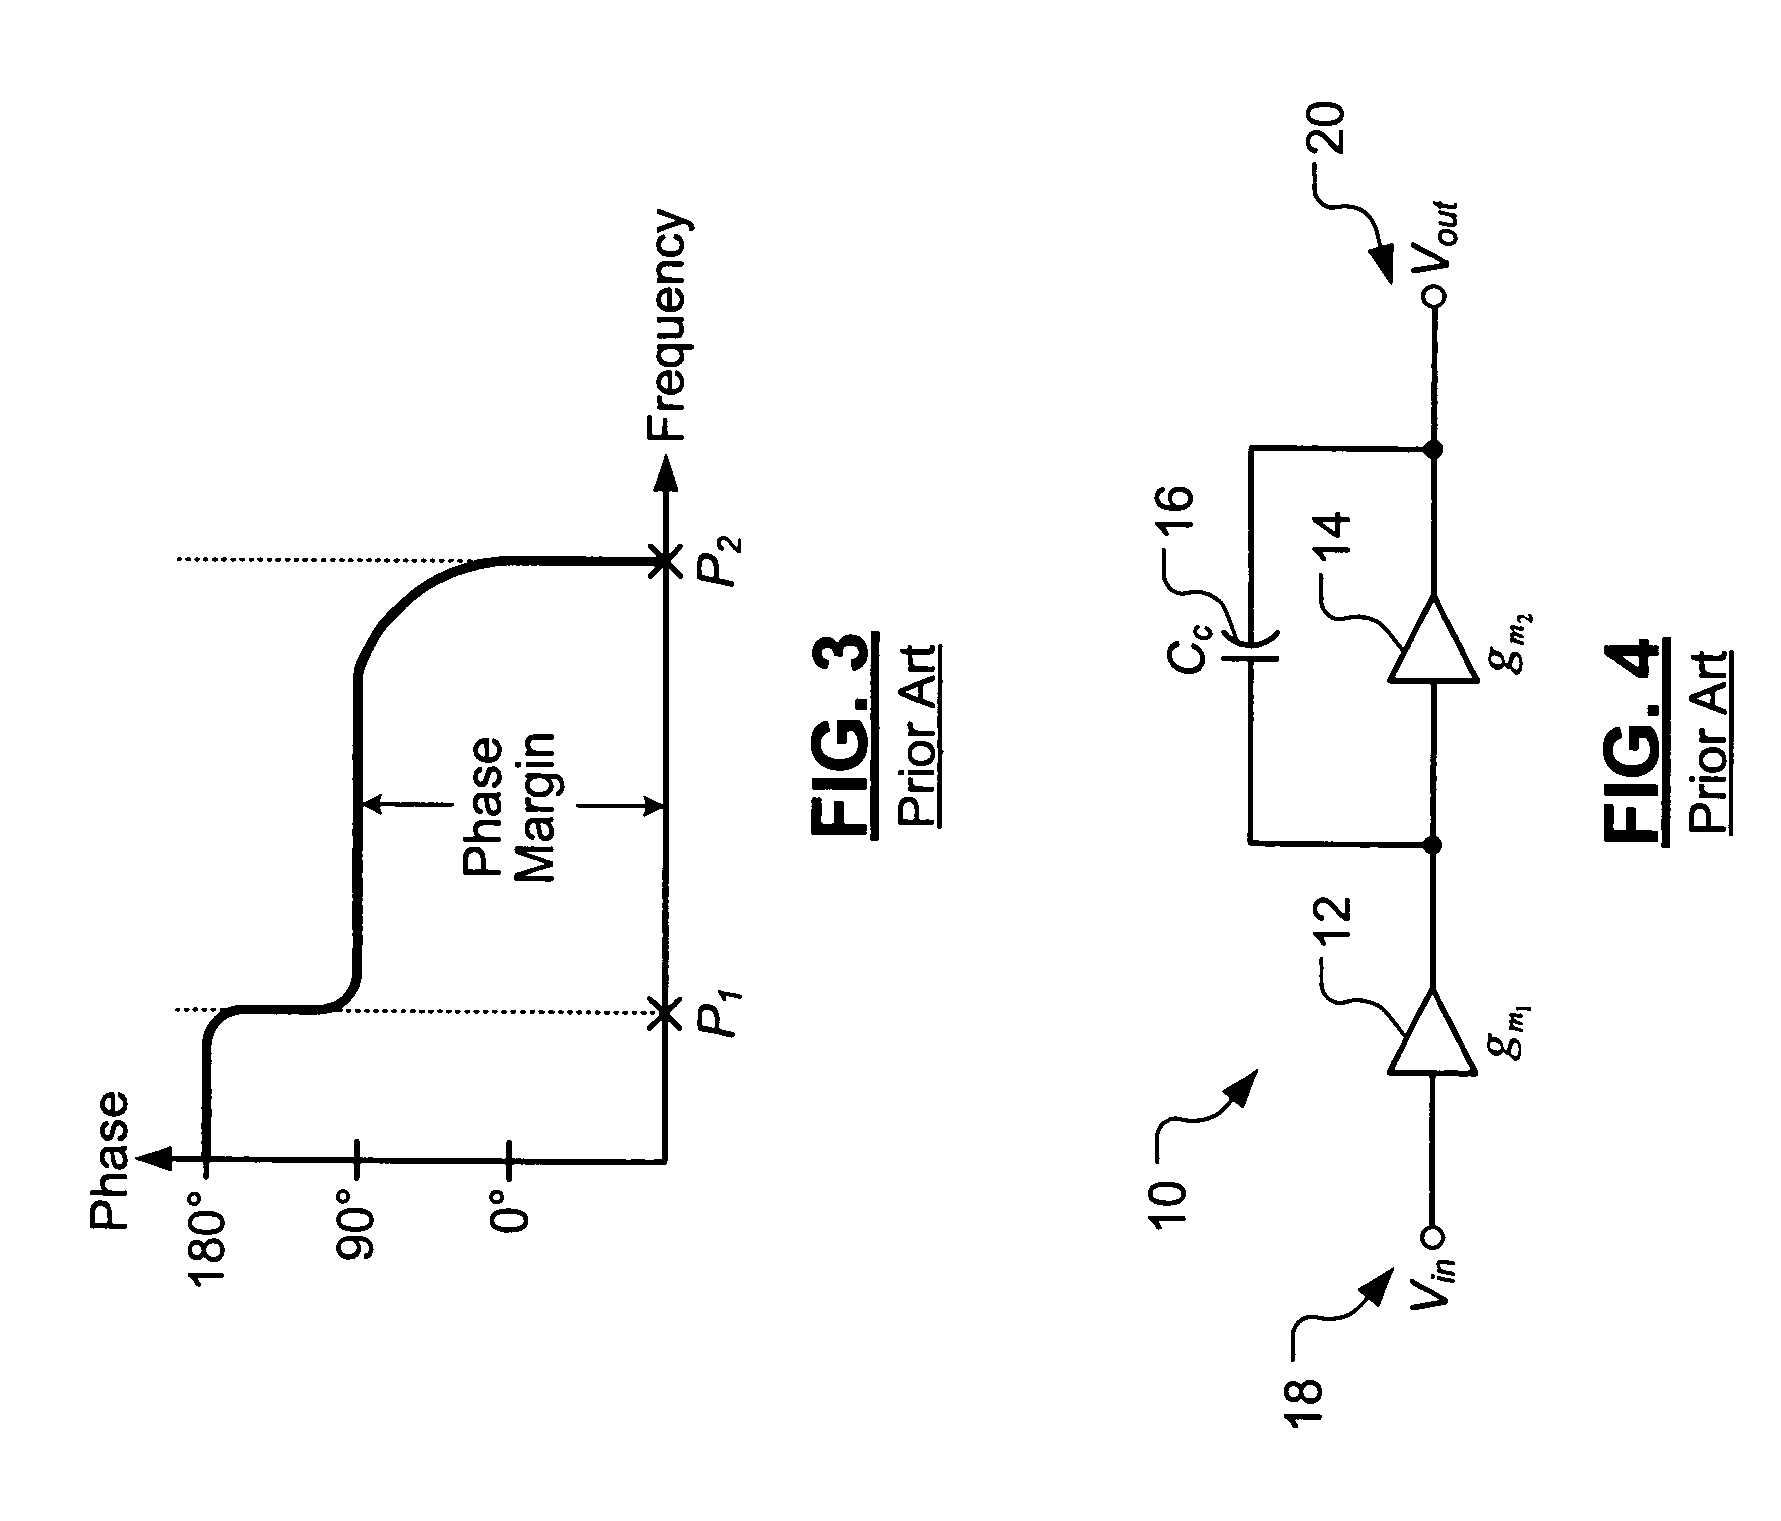 Frequency compensation architecture for stable high frequency operation